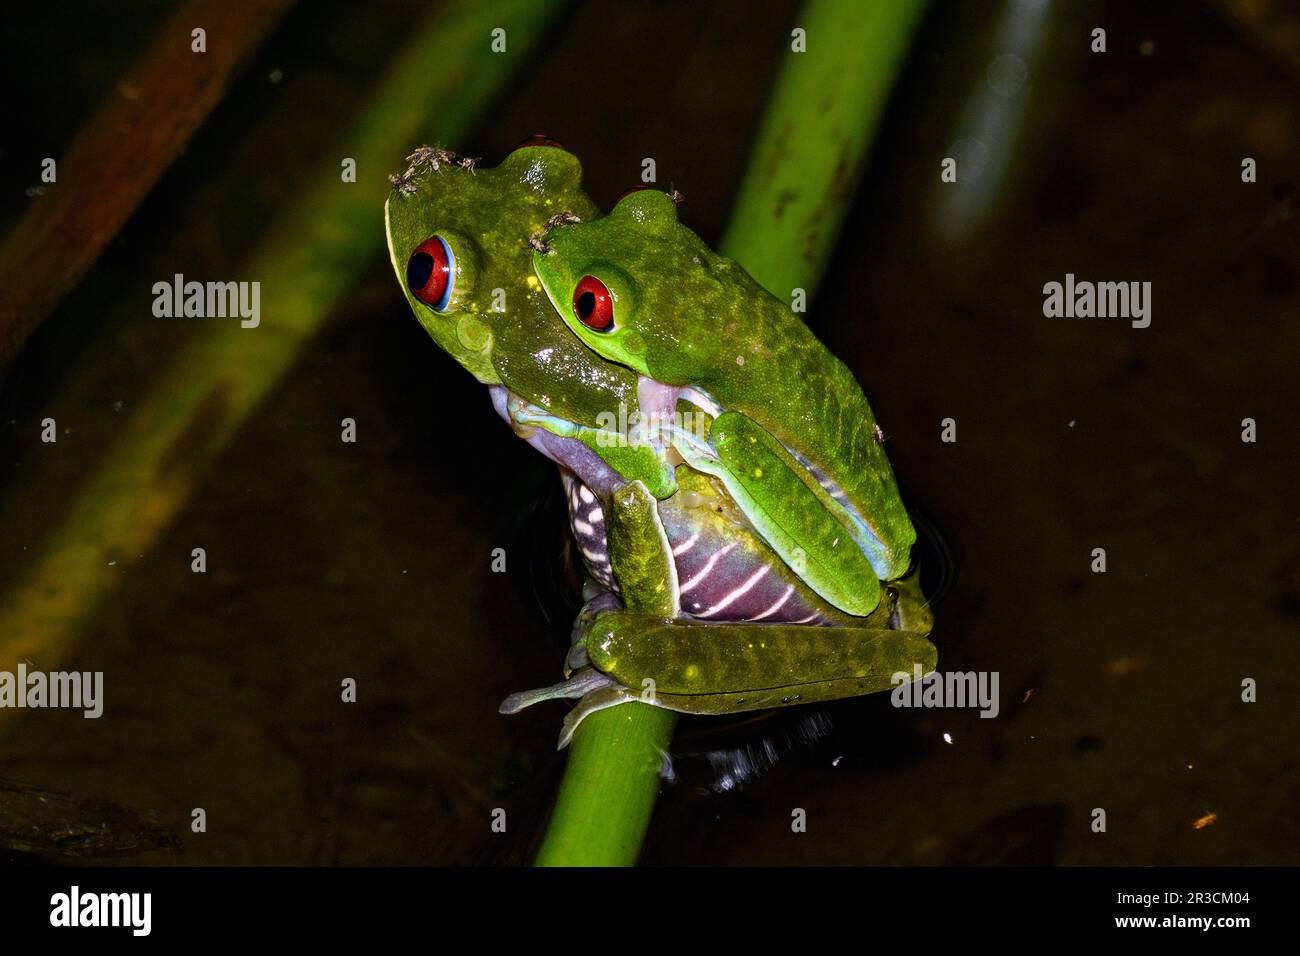 Red-eyed tree frogs (Agalychnis callidryas) mating. Photo  from Piedras Blancas National Park, Osa Peninsula, Costa Rica. Stock Photo